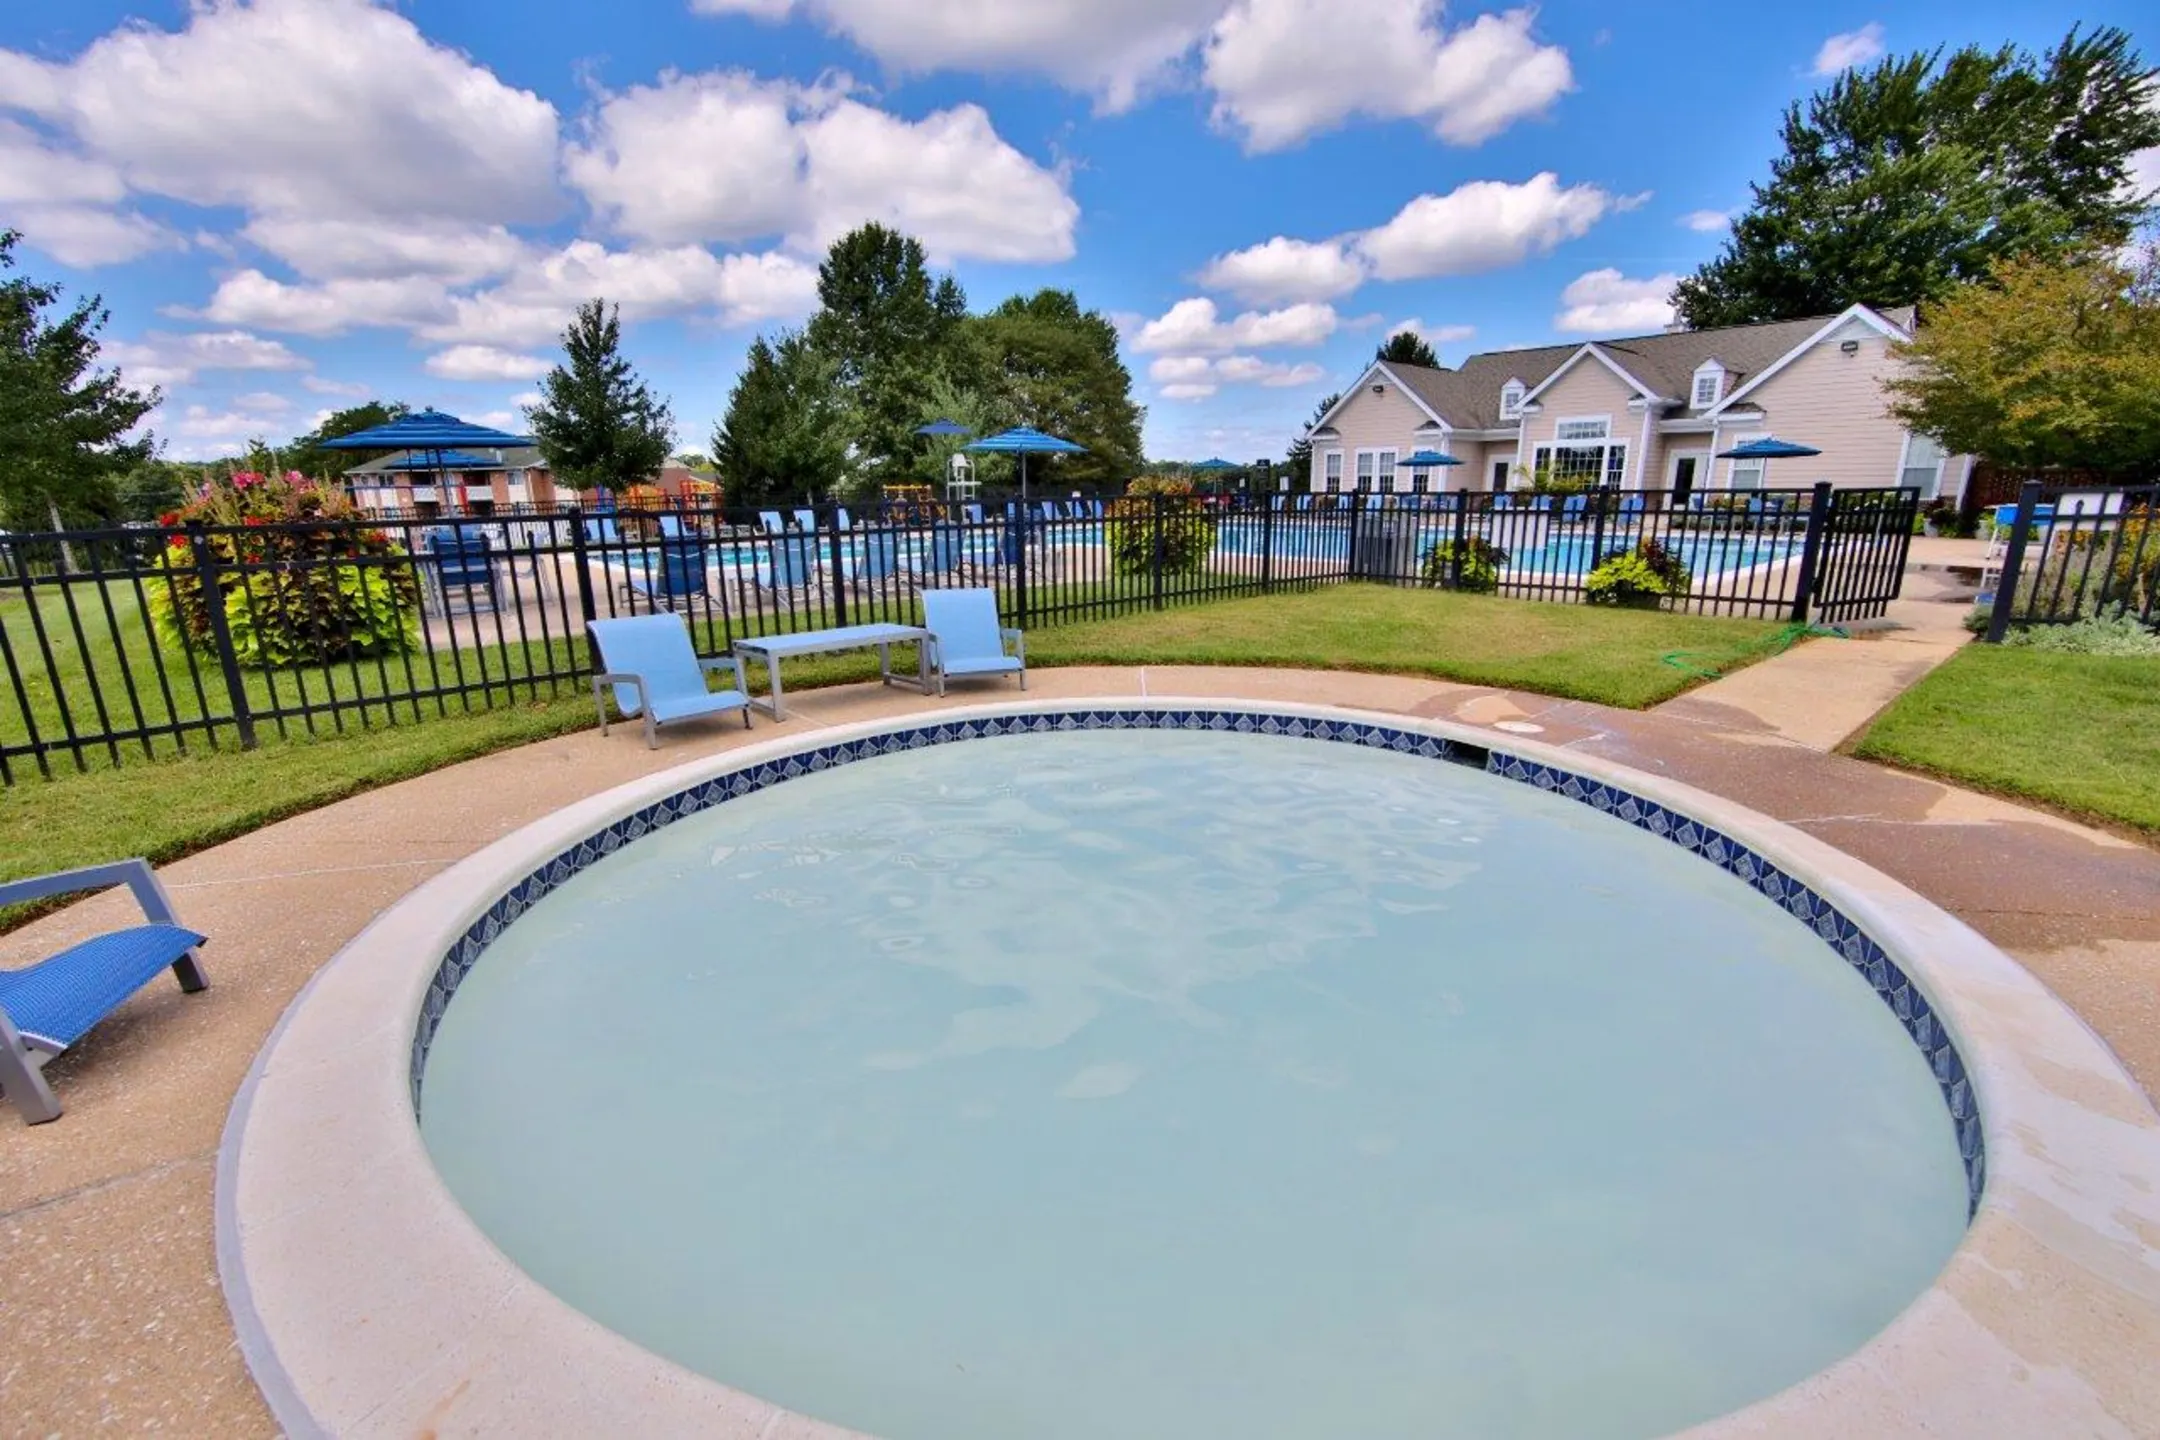 Pool - Westerlee Apartment Homes - Catonsville, MD